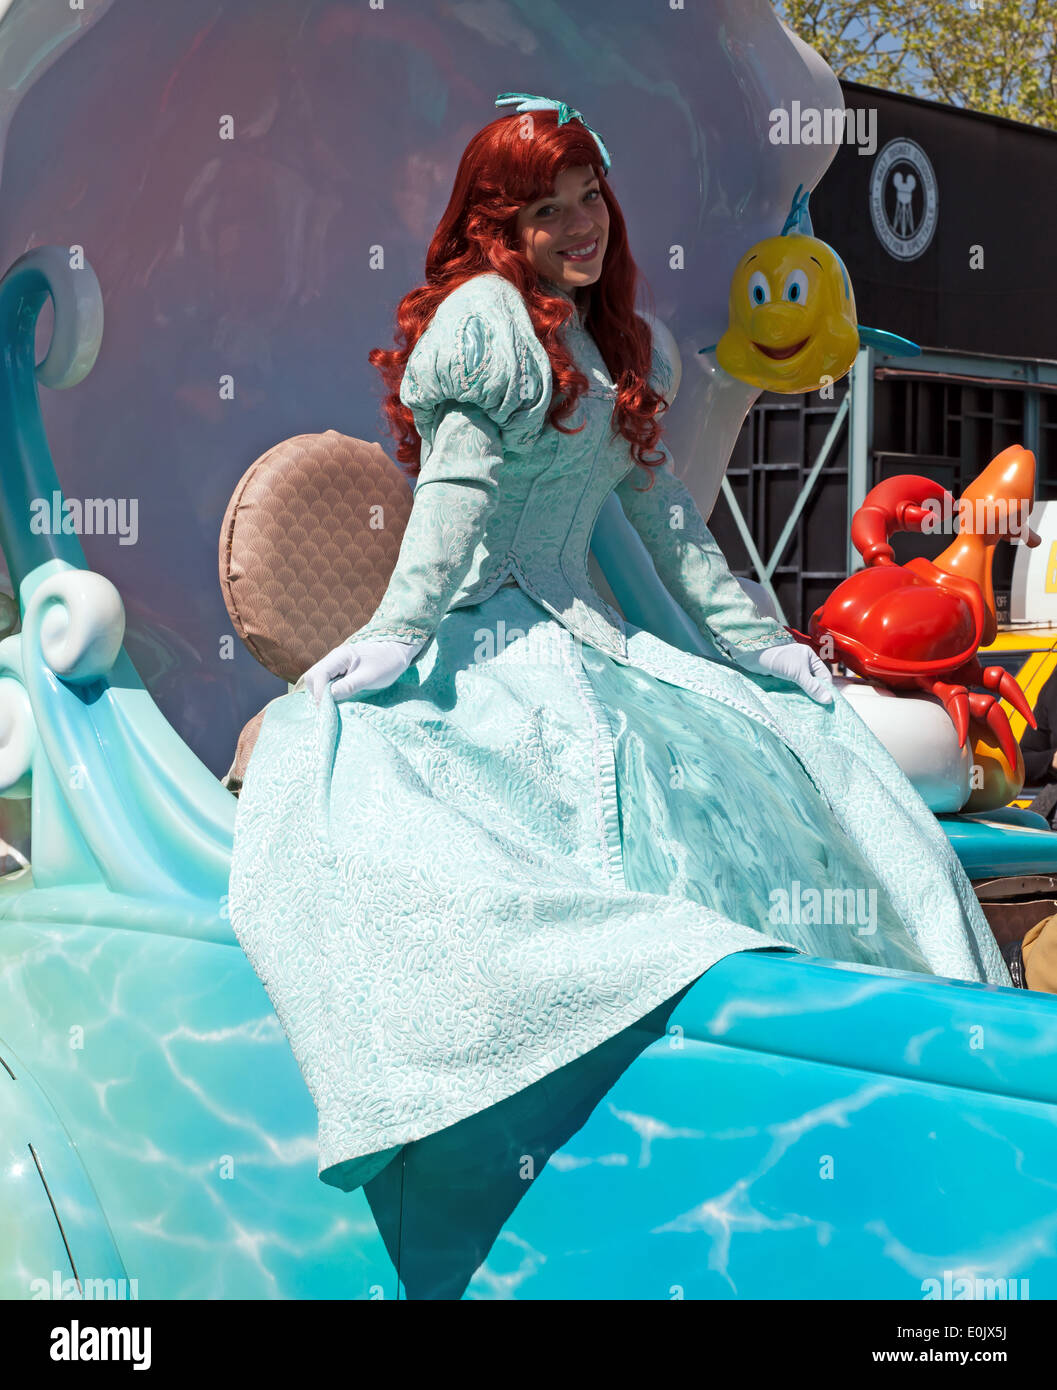 A close-up image of Ariel, from the Little Mermaid film, taking part  in the Stars 'n' Cars, Parade, Walt Disney Studios, Paris. Stock Photo